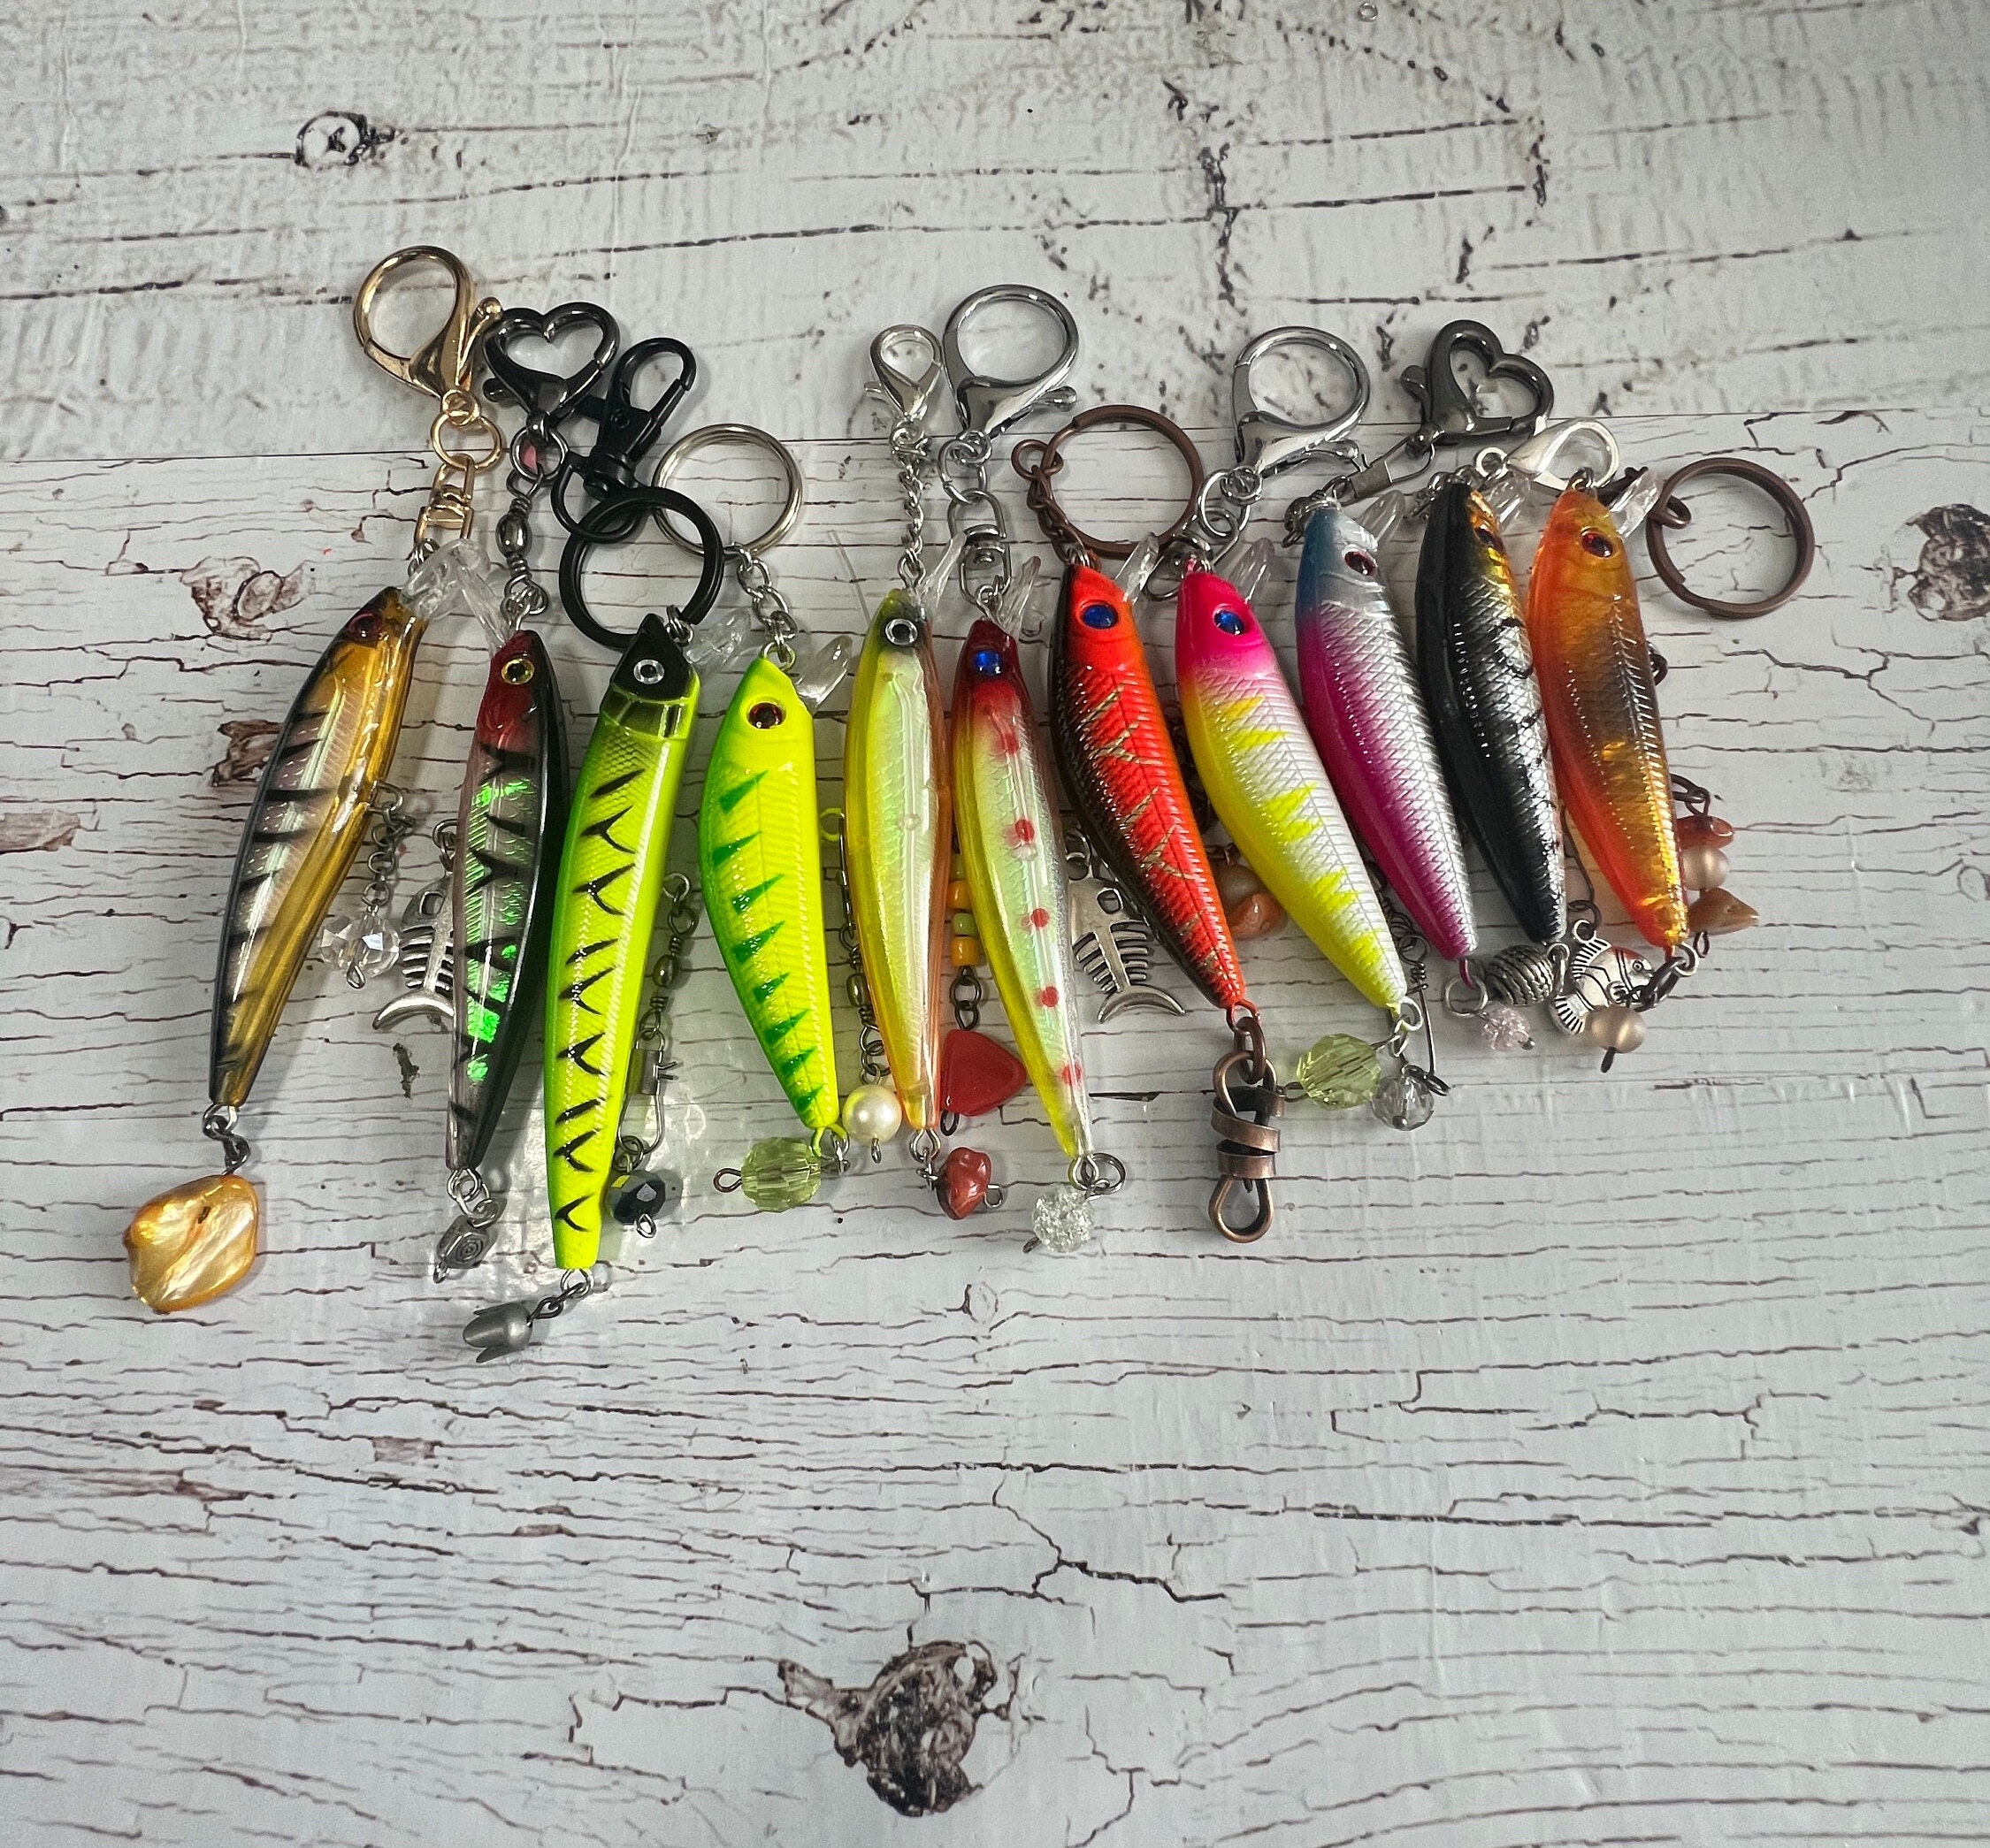 Minnow Fishing Lure Key Chain Personalize, Customized, Hooked on